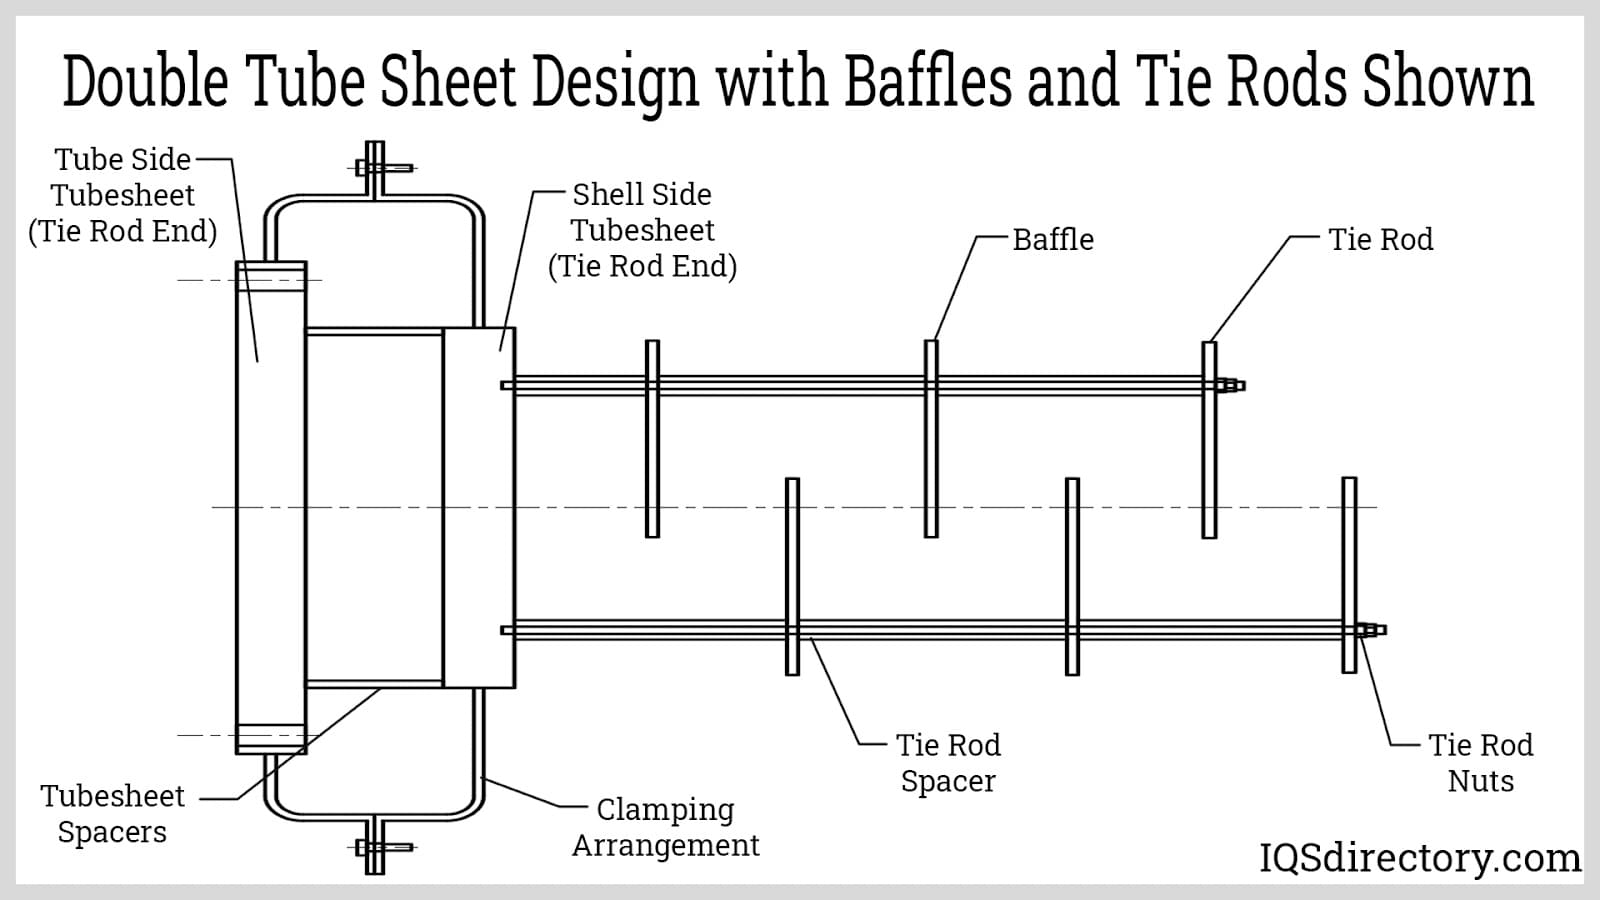 Double Tube Sheet Design with Baffles and Tie Rods Shown